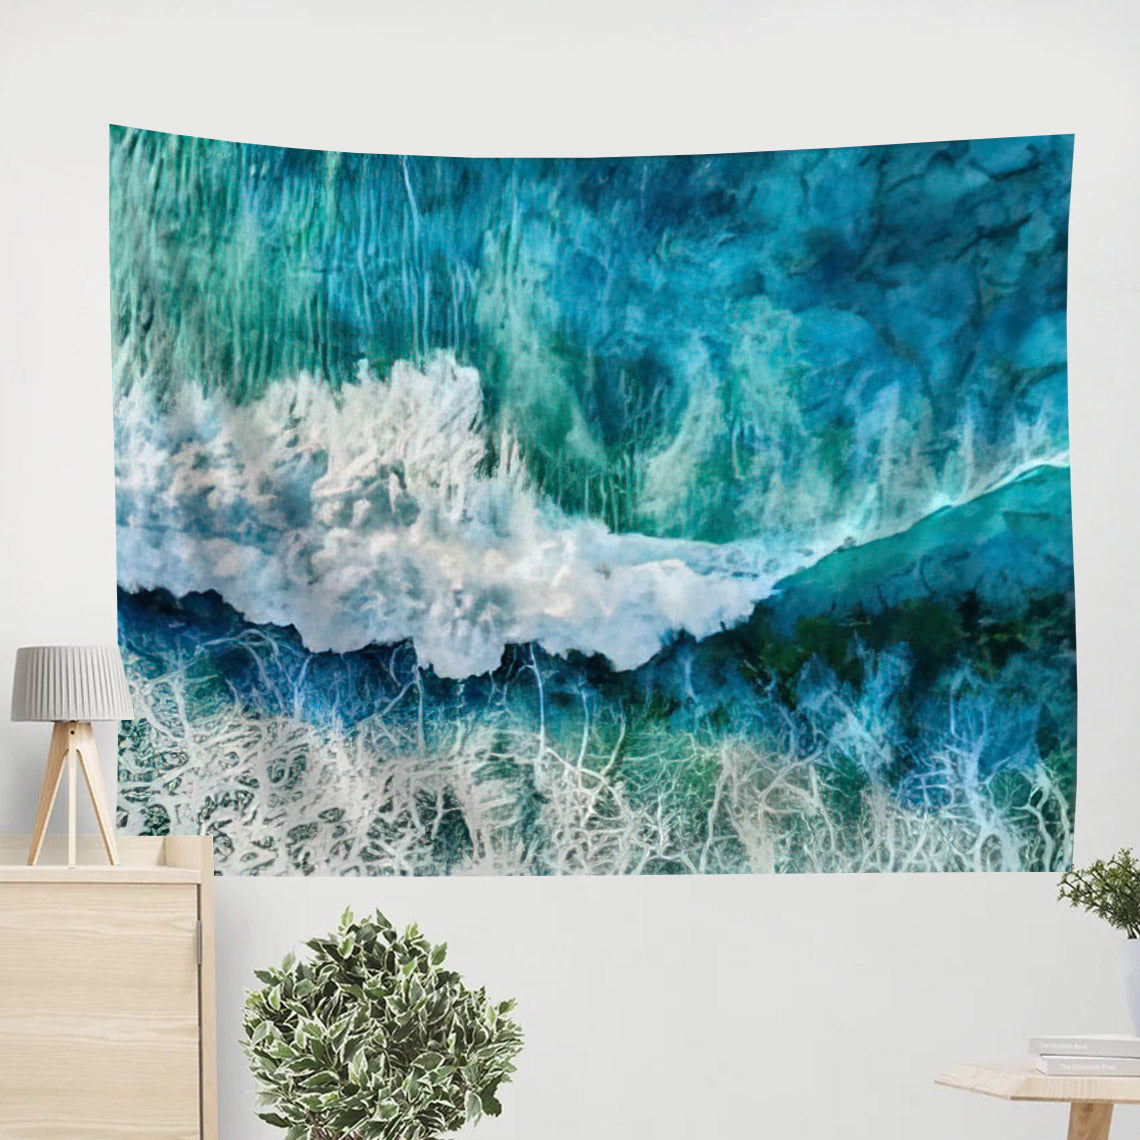 Ocean Waves Beach Tapestry - Tapestry Wall Decor - Home Decor Living Room